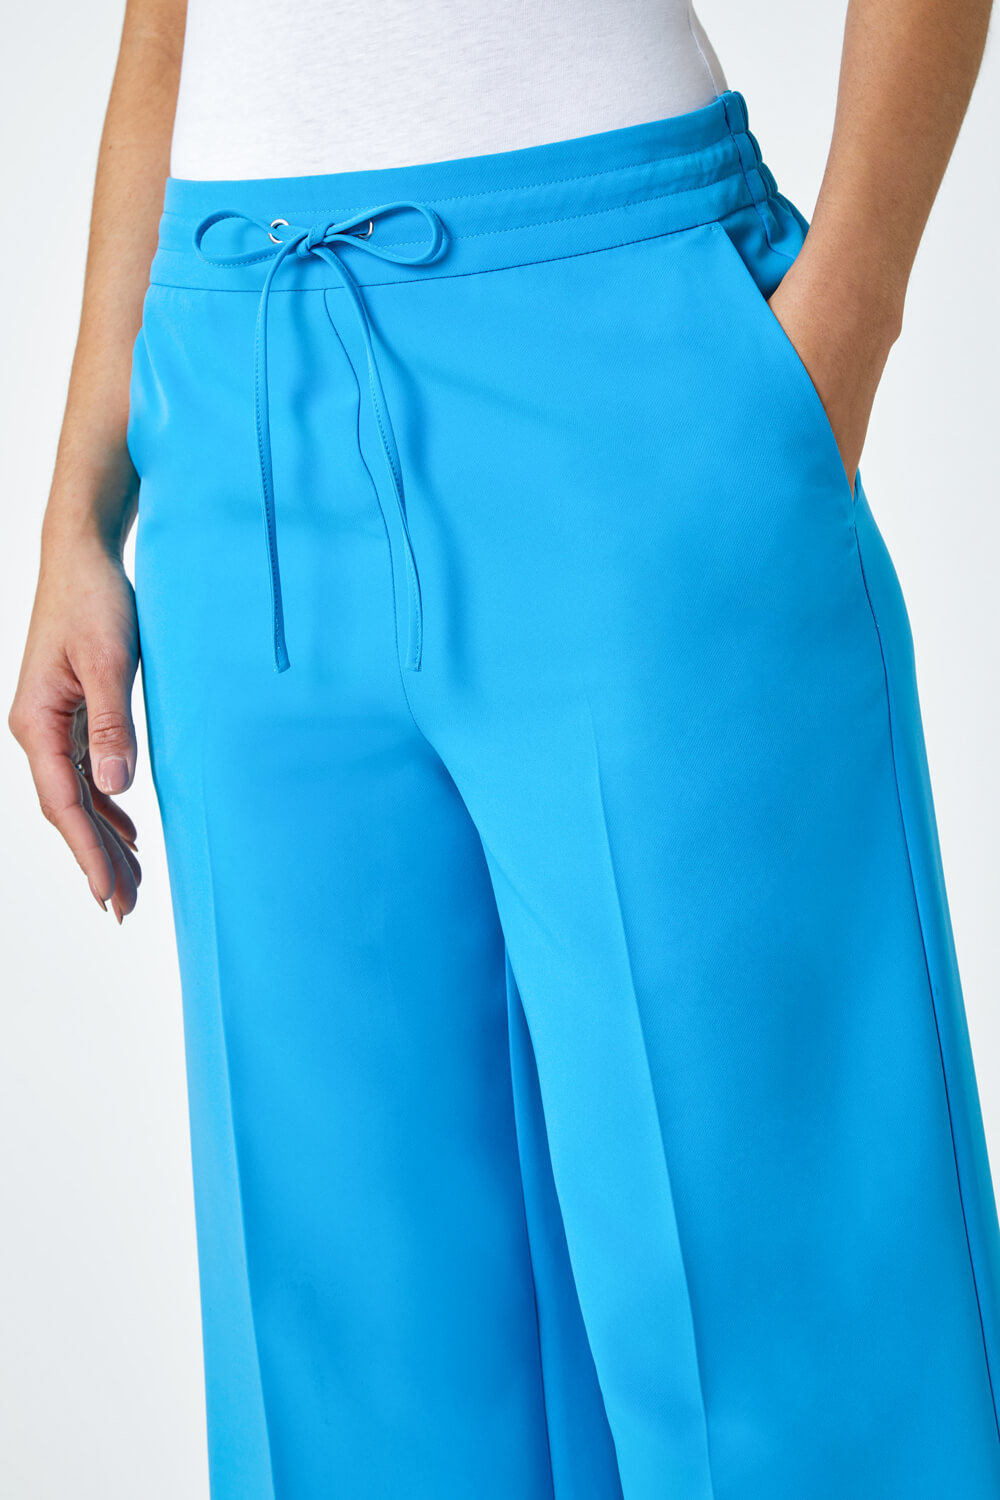 Turquoise Wide Leg Tie Front Stretch Trouser, Image 5 of 5